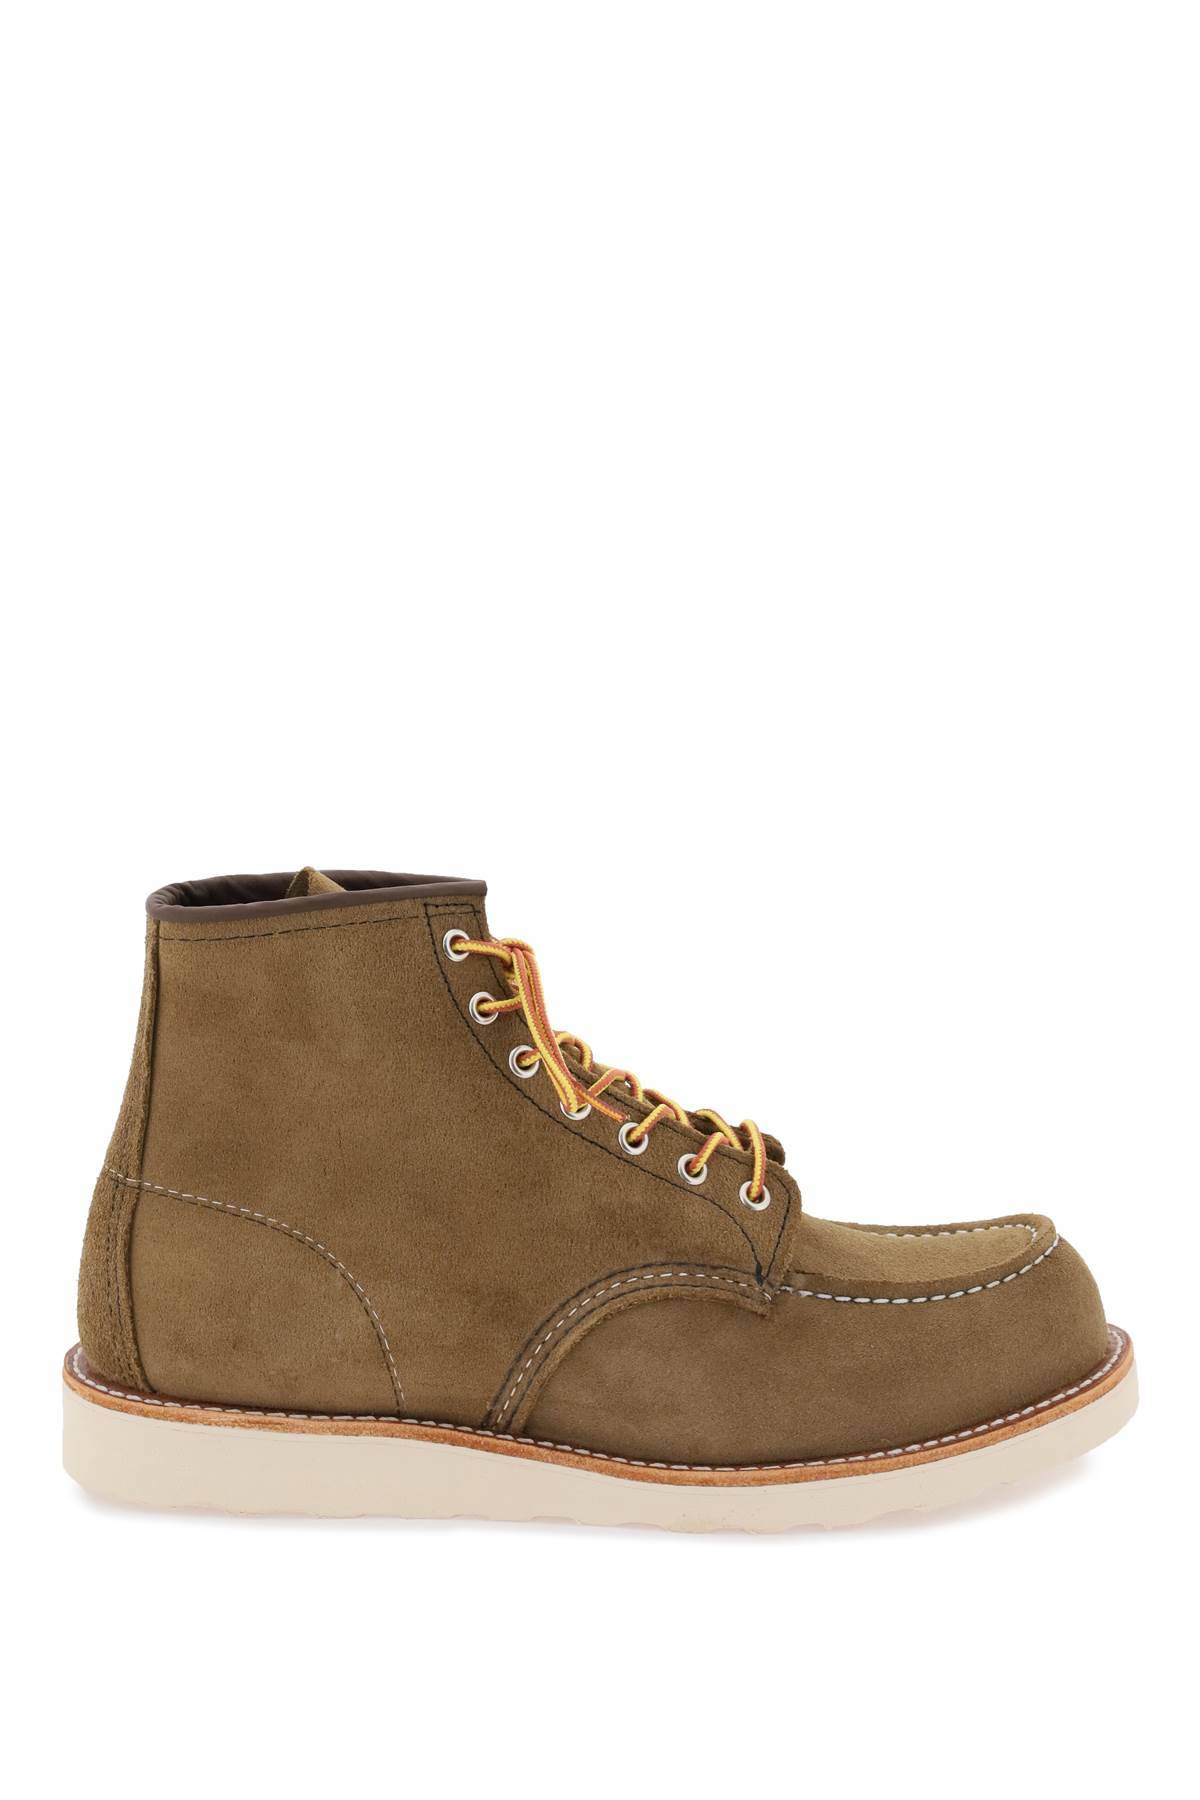 RED WING SHOES RED WING SHOES classic moc ankle boots